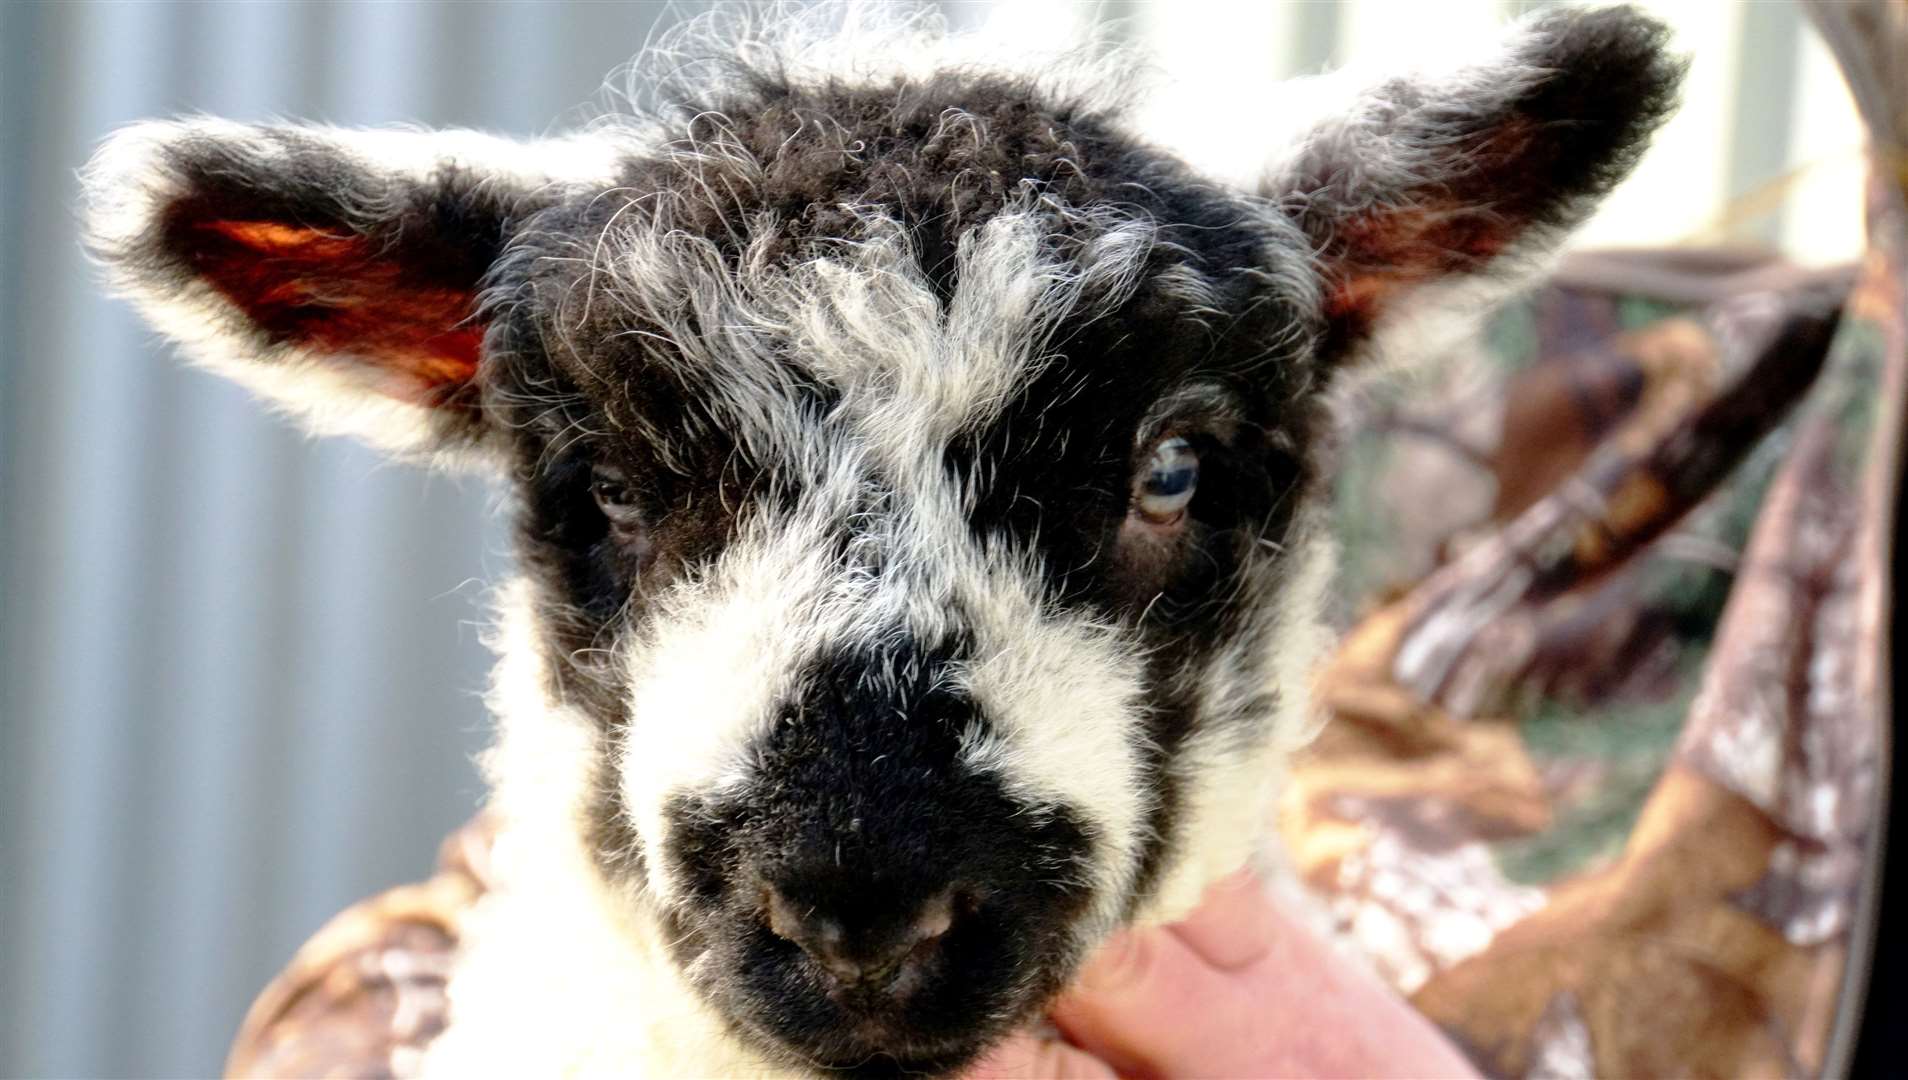 "Freedom" the lamb is welcomed to the world. Photo: DGS